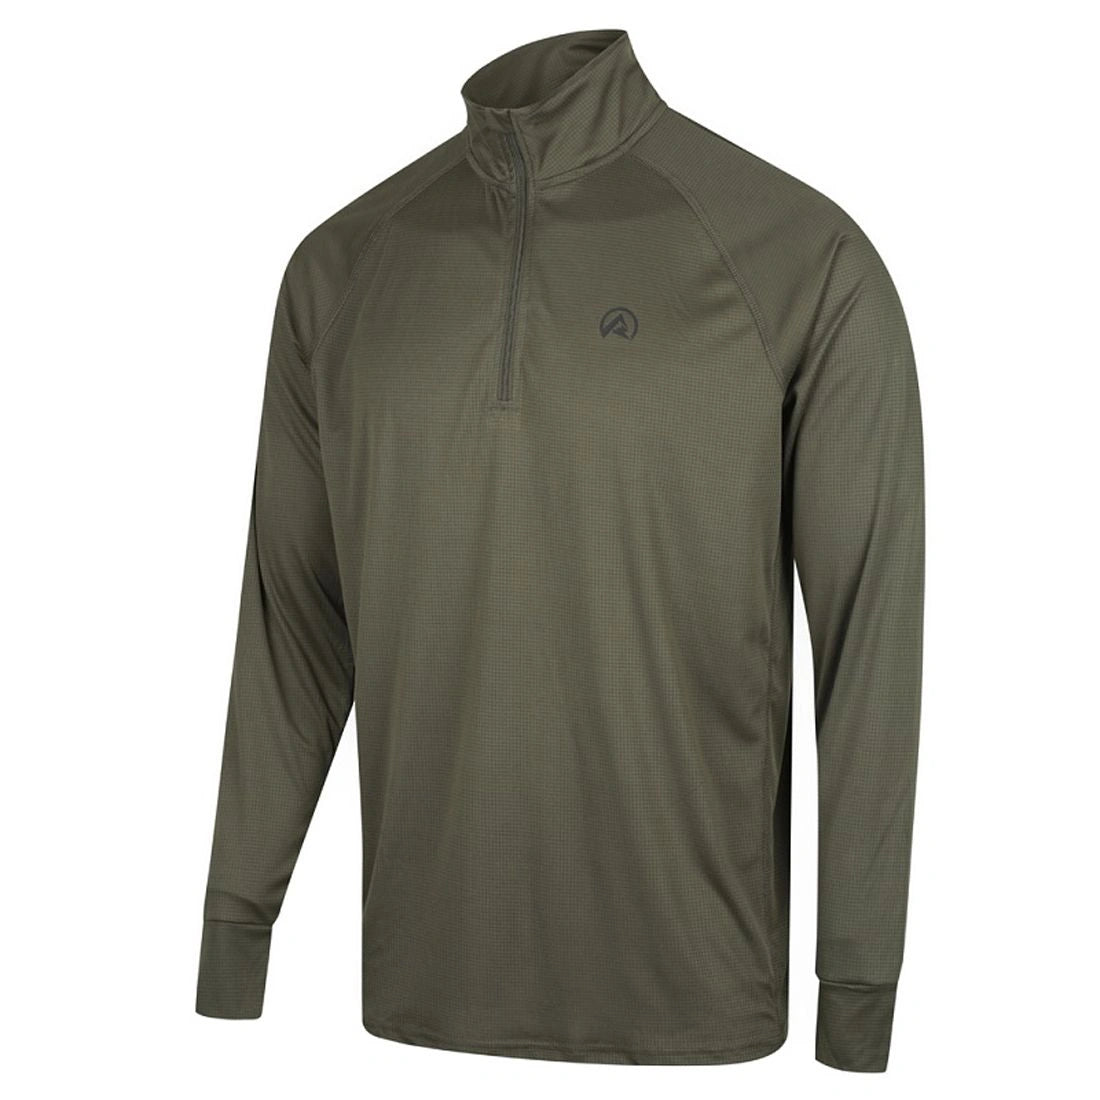 Ridgeline Mens Performance QTR Zip Top - Forest - XS / FOREST - Mansfield Hunting & Fishing - Products to prepare for Corona Virus